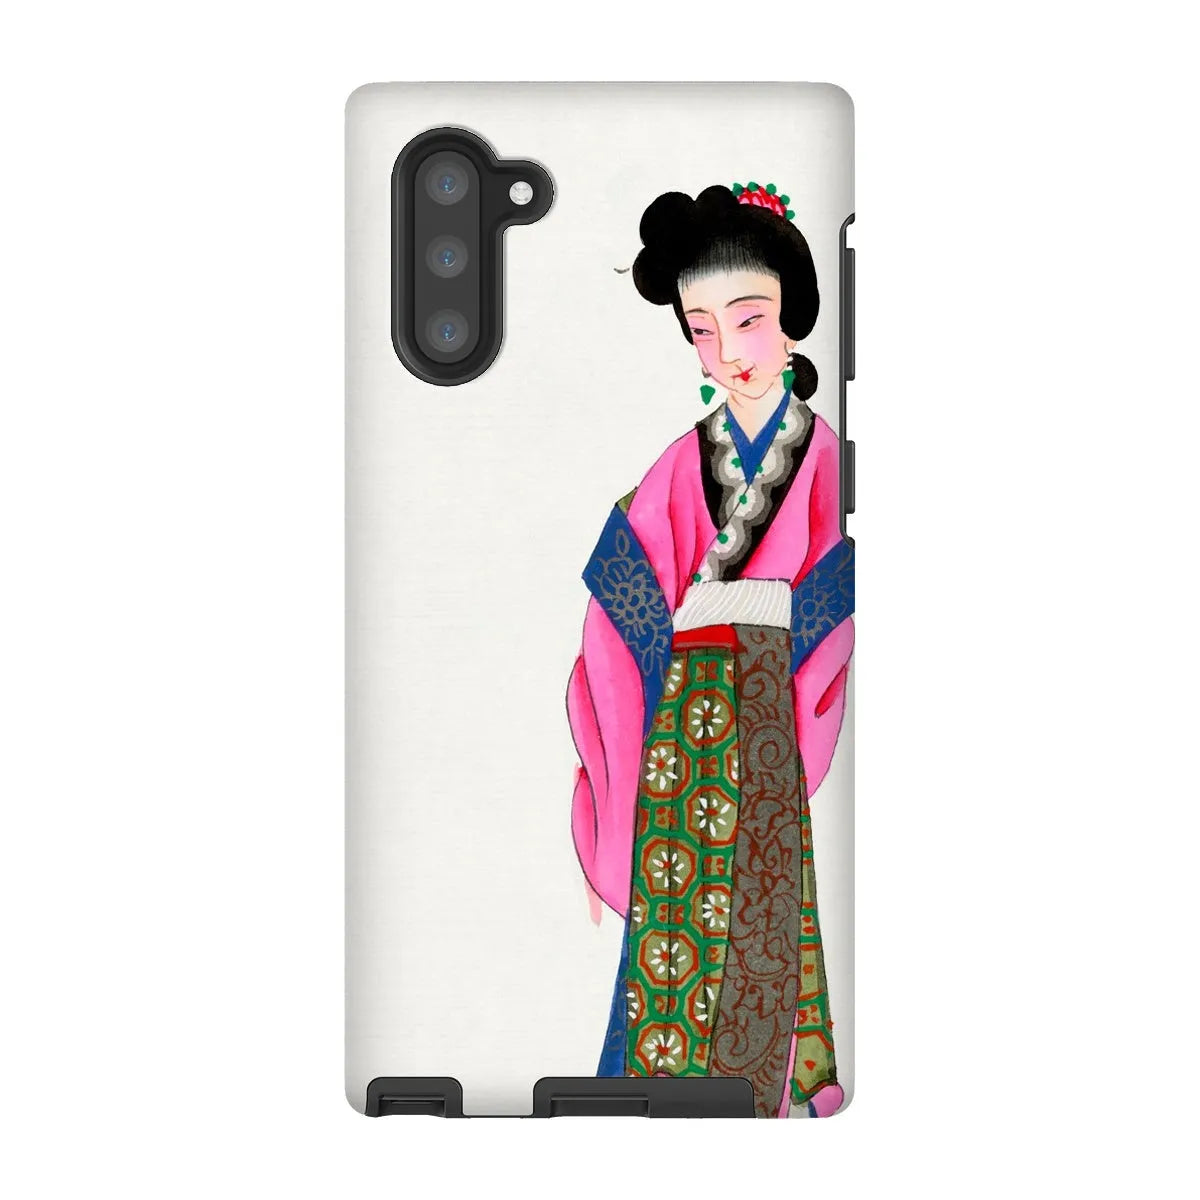 Noblewoman - Chinese Aesthetic Manchu Art Phone Case - Samsung Galaxy Note 10 / Matte - Mobile Phone Cases - Aesthetic